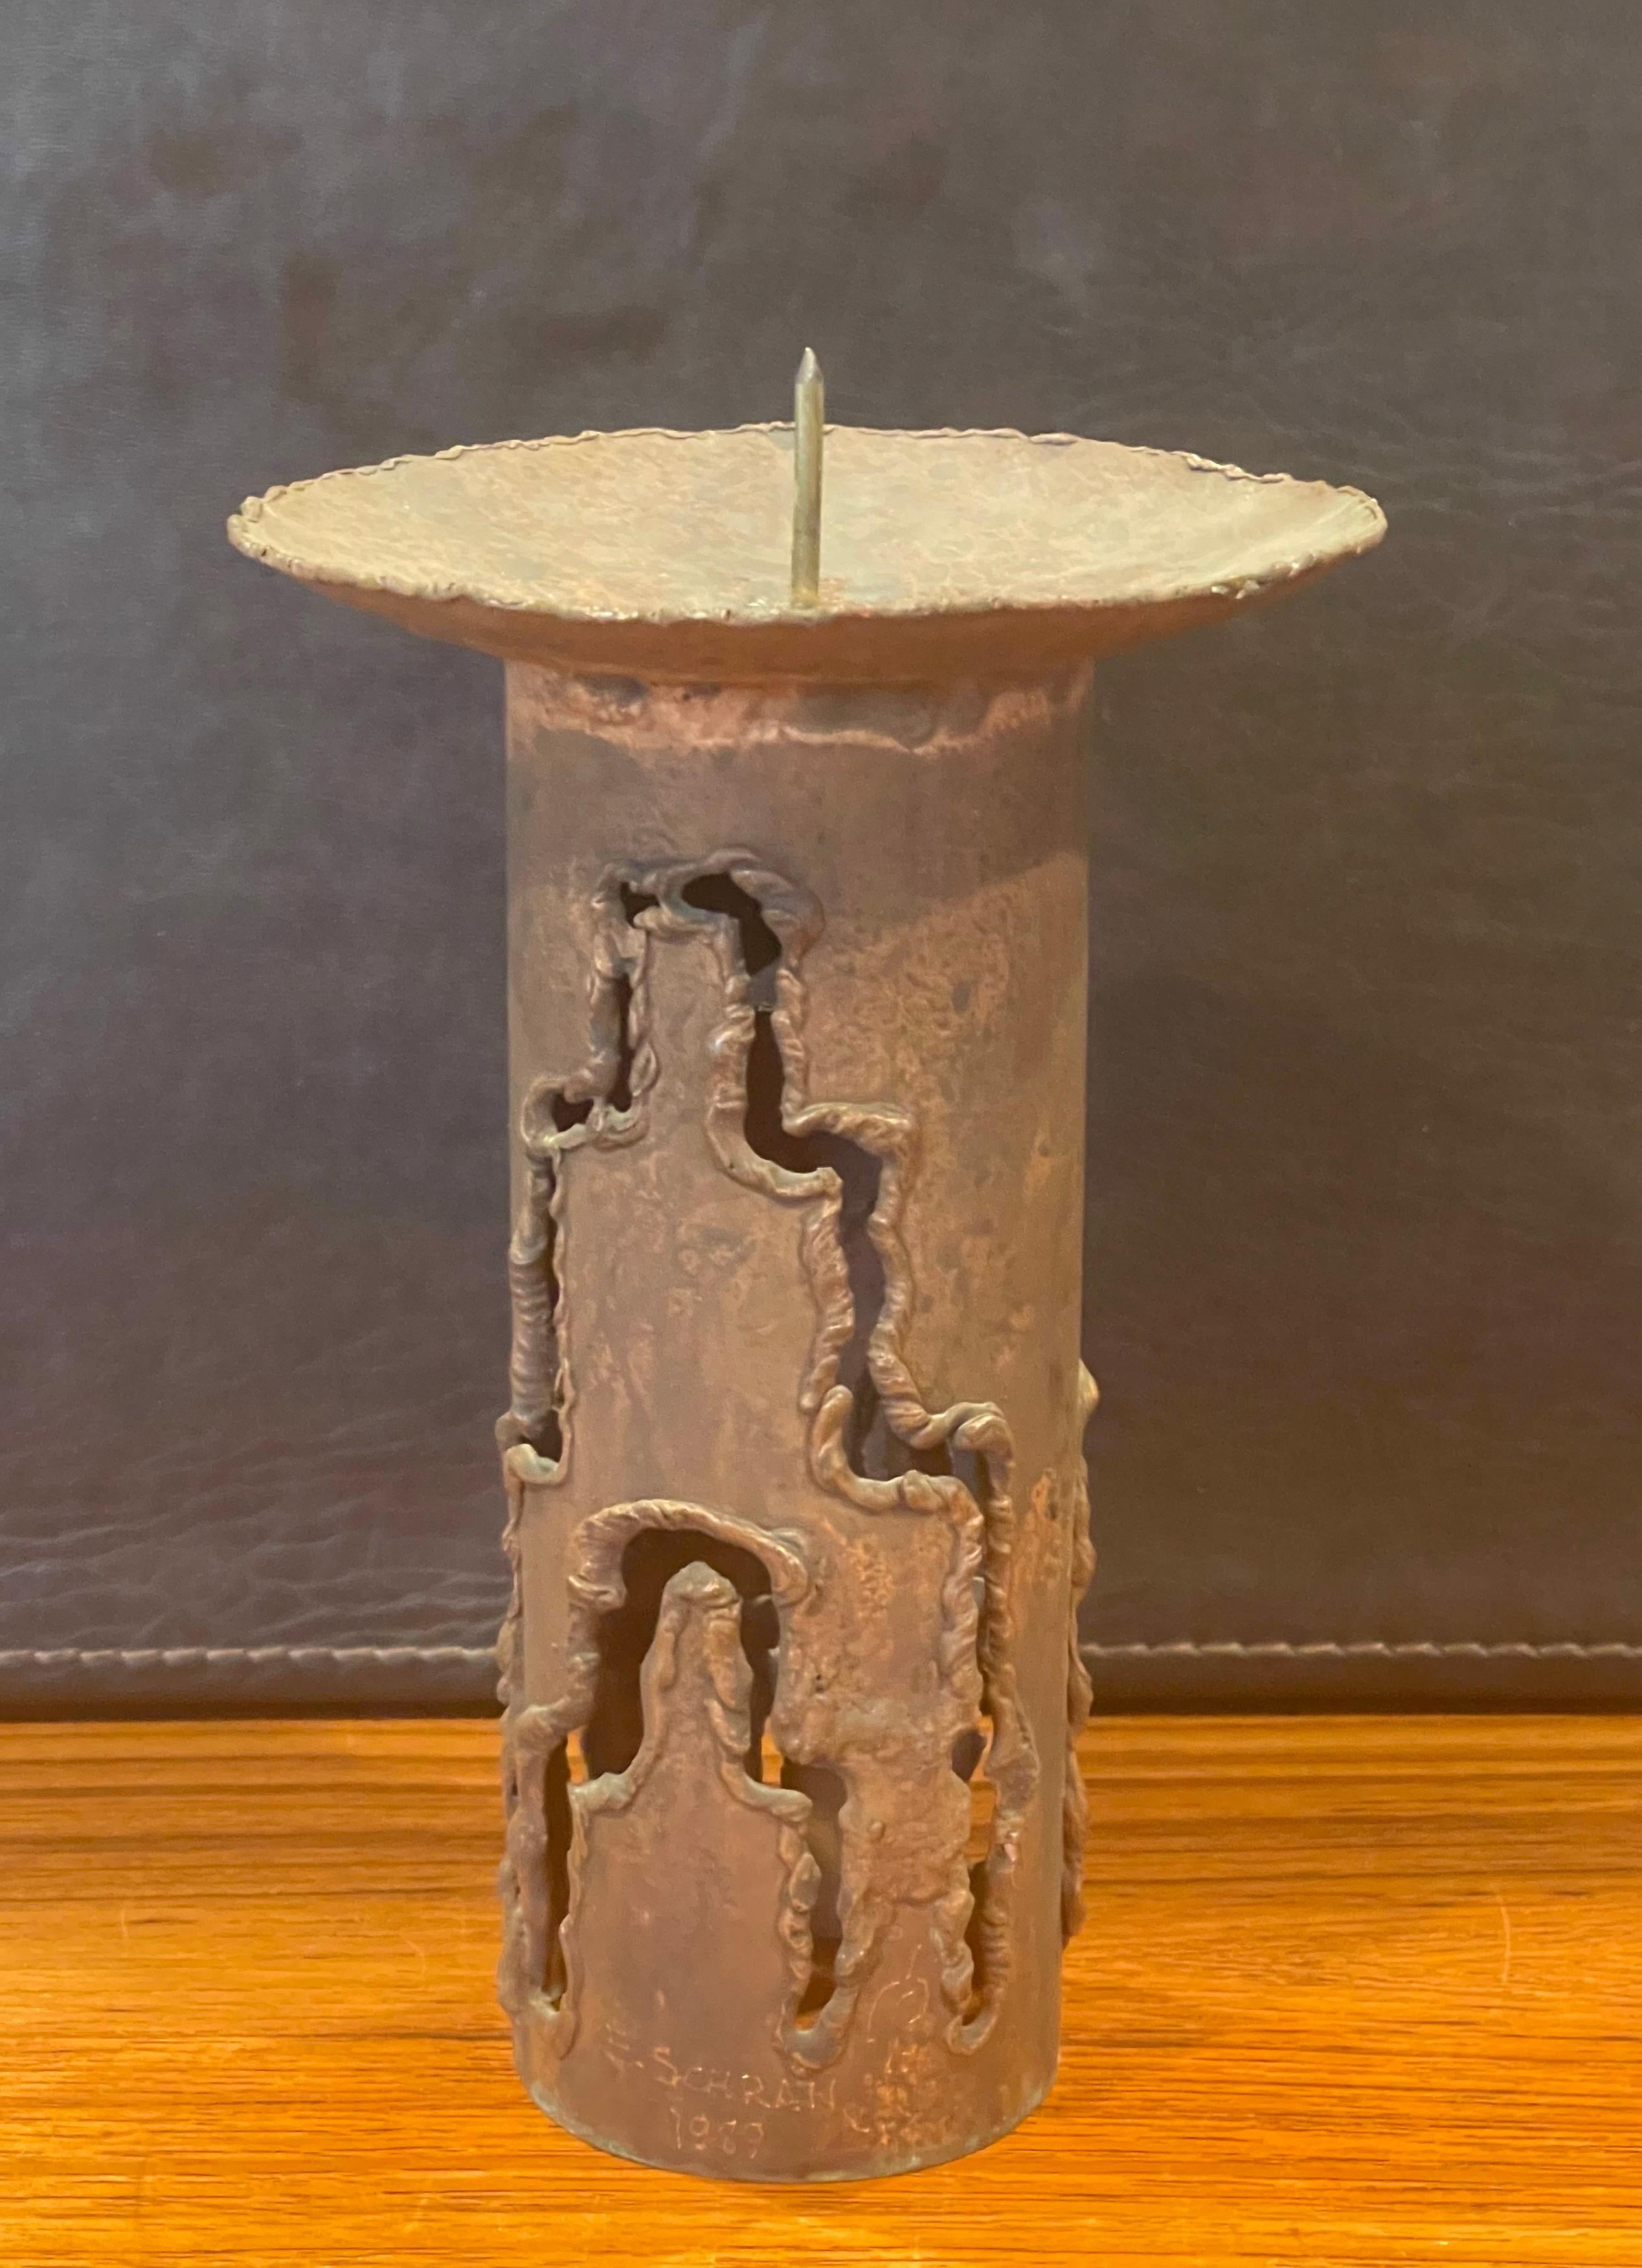 Tall torch cut brutalist copper candleholder by E.Schran, circa 1989. The piece is in very good vintage condition and measures 5.25